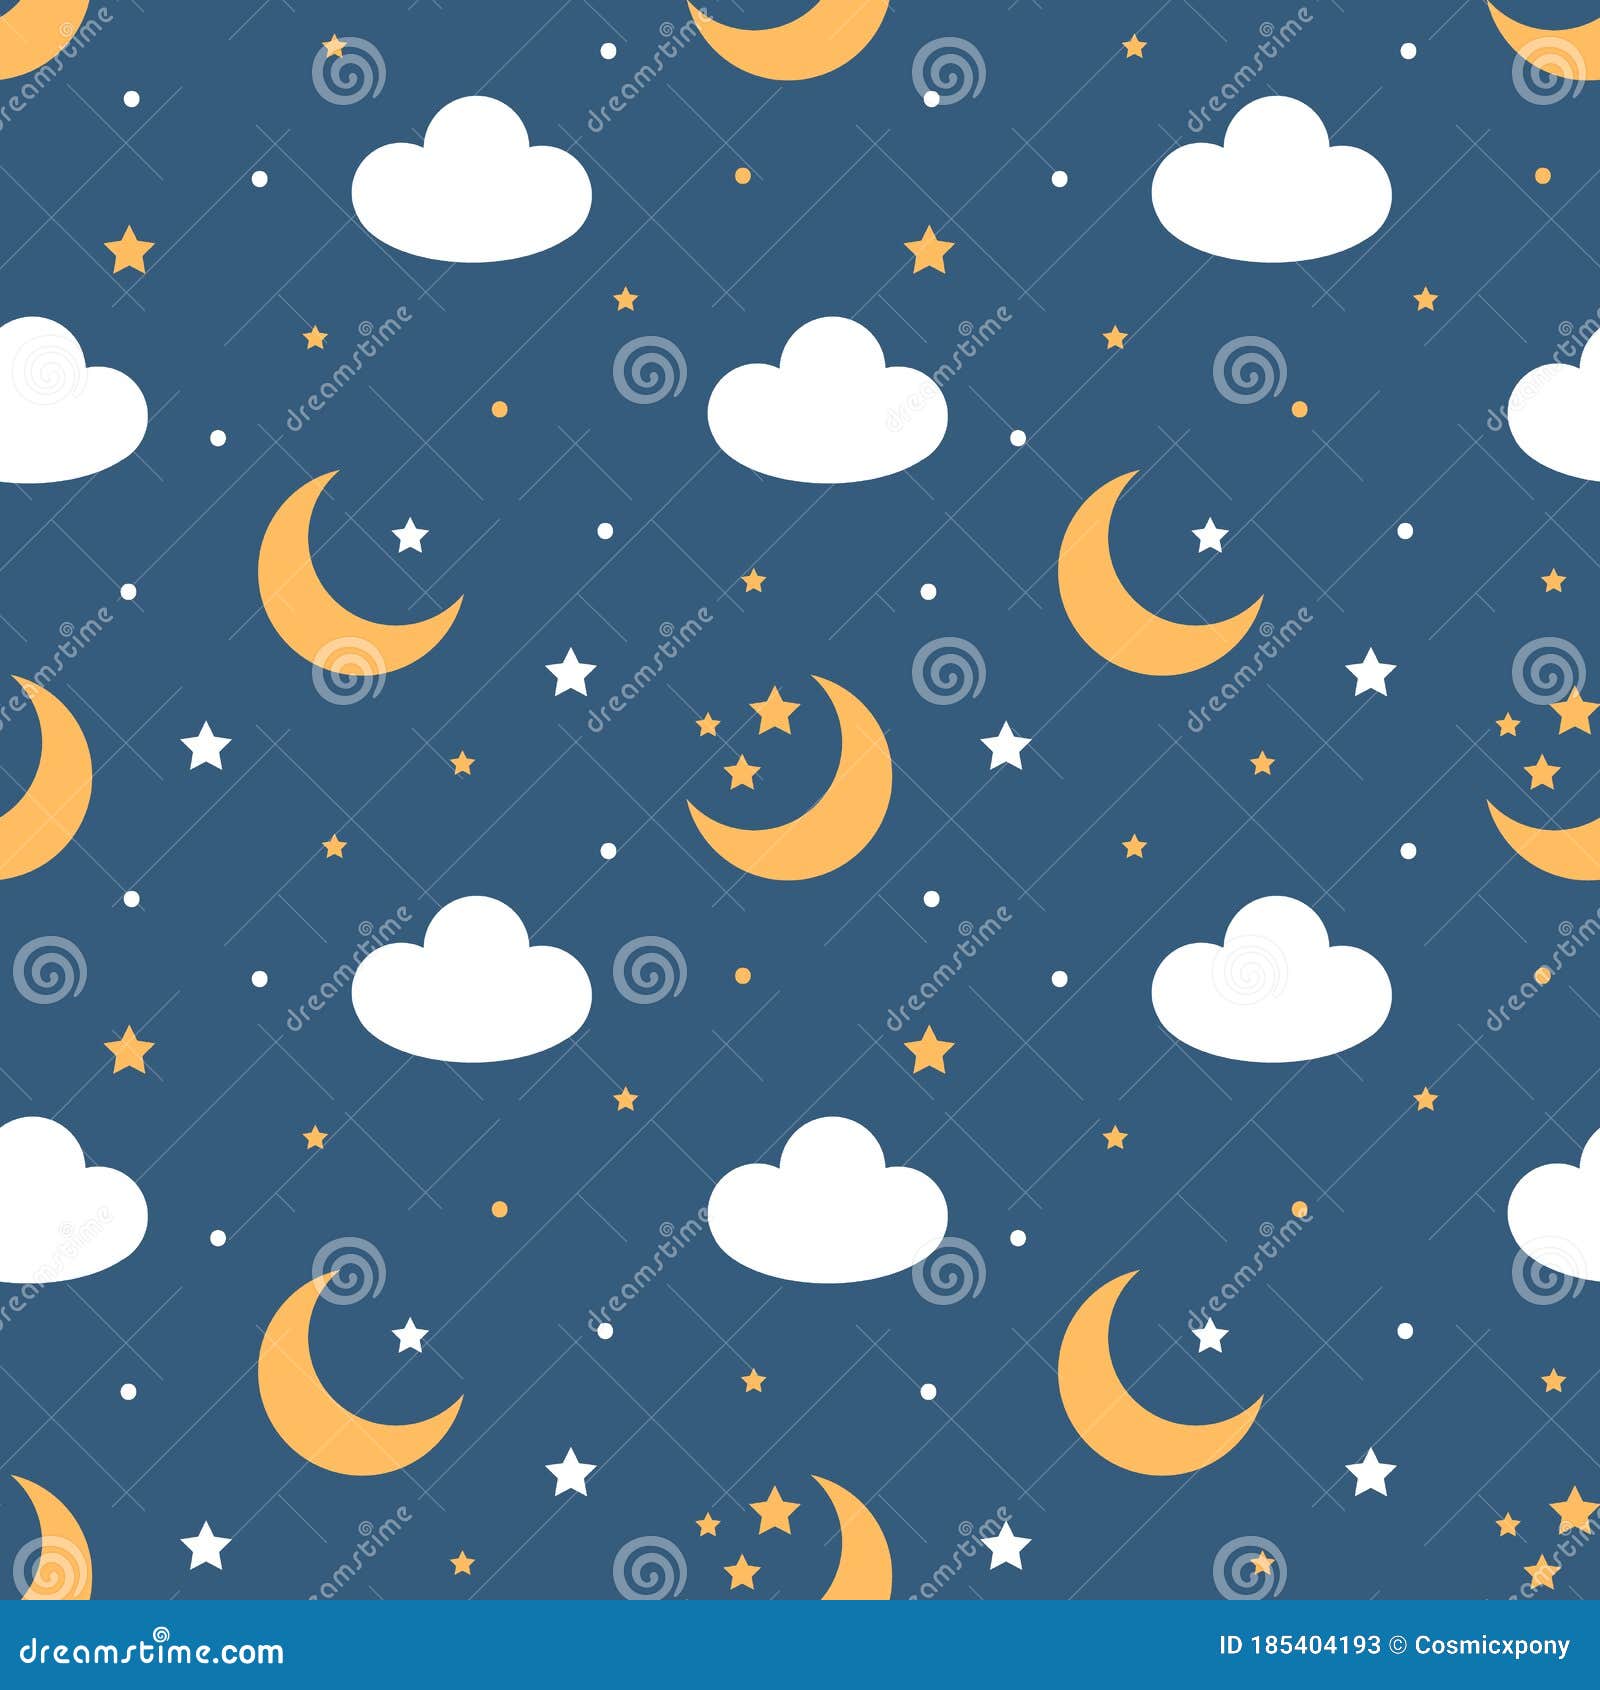 Cute Cartoon Style Seamless Pattern Background with Moon, Stars and Clouds  Stock Vector - Illustration of symbol, background: 185404193